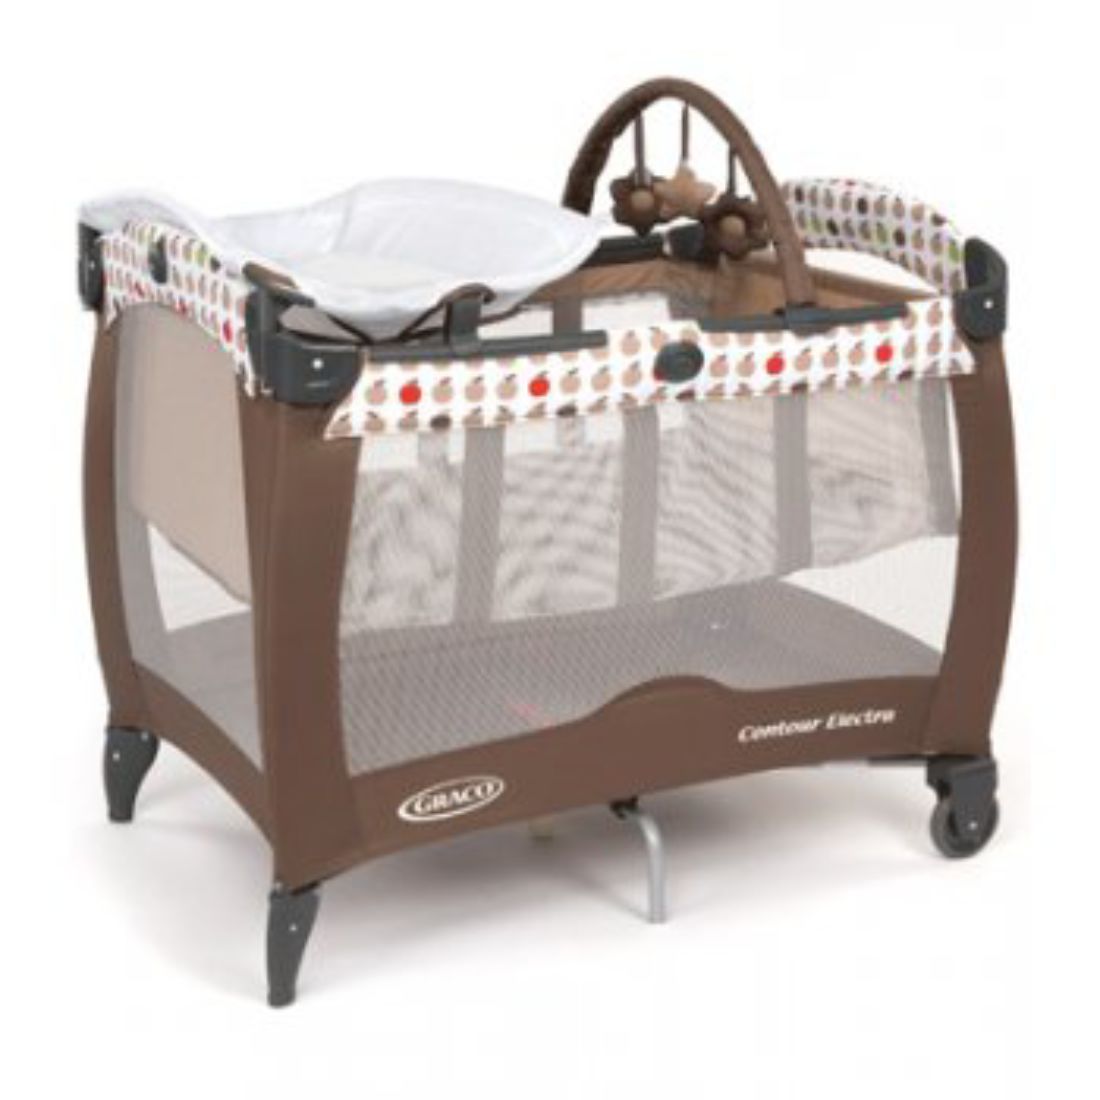 mattress for graco travel cot